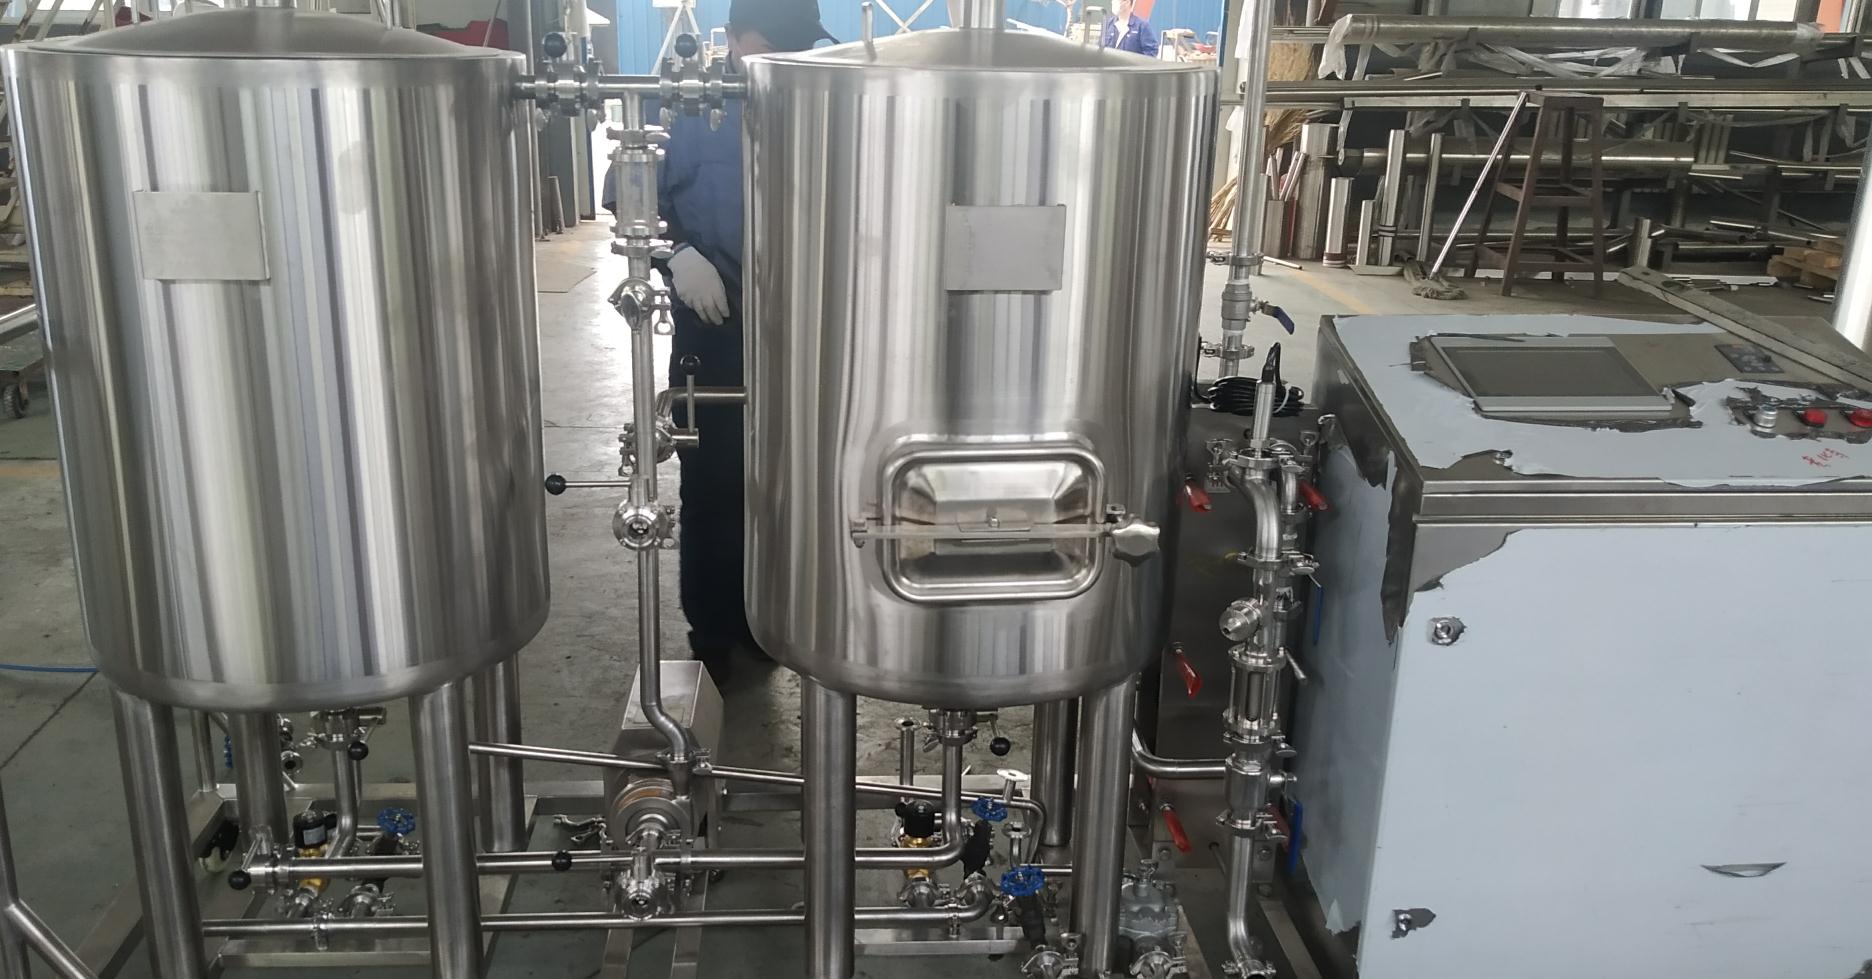 Colombia auto commercial beer brewery system of stainless steel China supplier 2020 W1